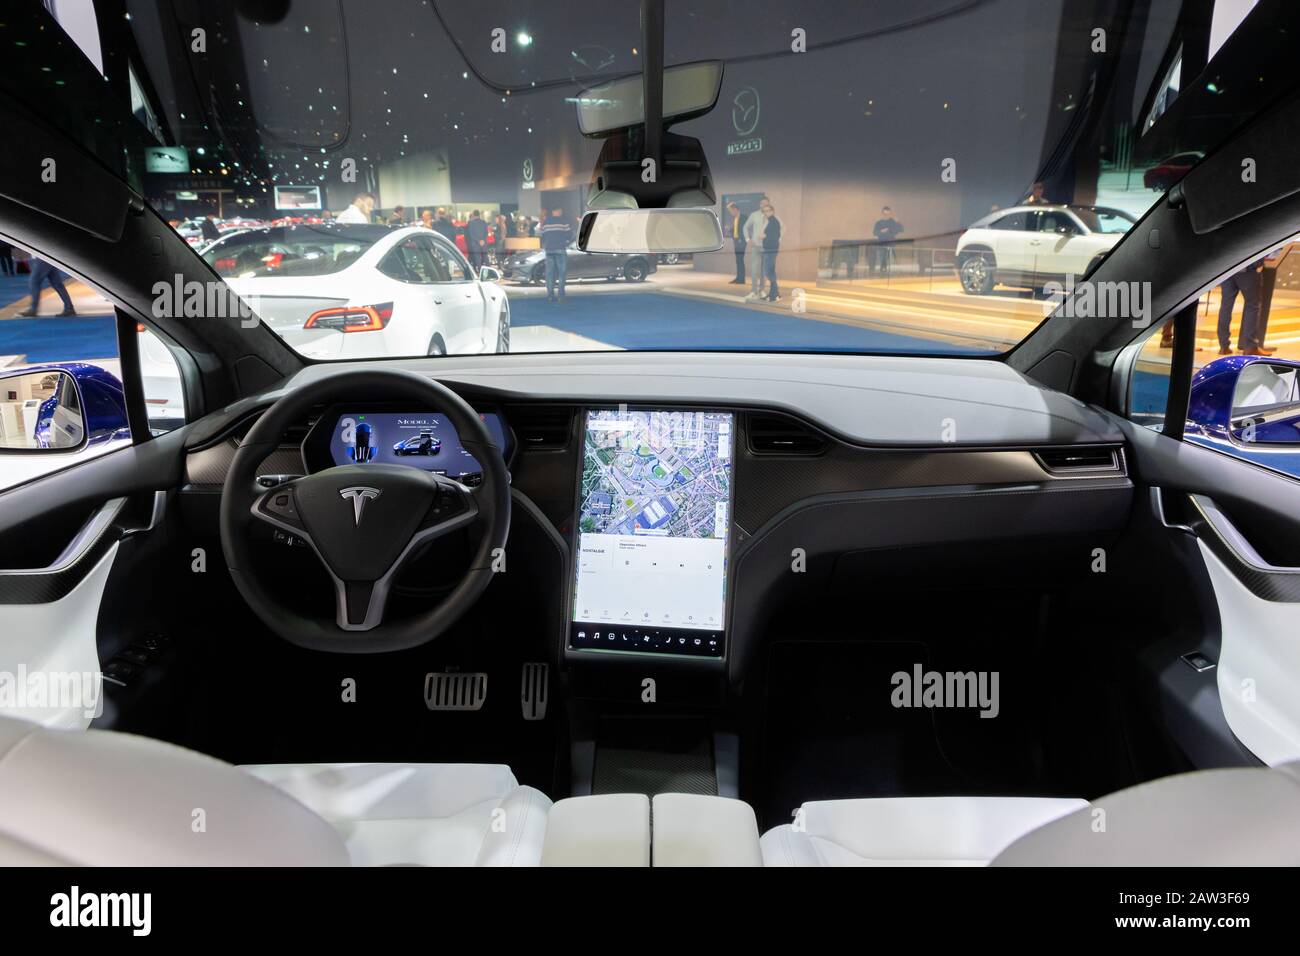 BRUSSELS - JAN 9, 2020: Tesla Model X car model interior dashboard view showcased at the Brussels Autosalon 2020 Motor Show. Stock Photo